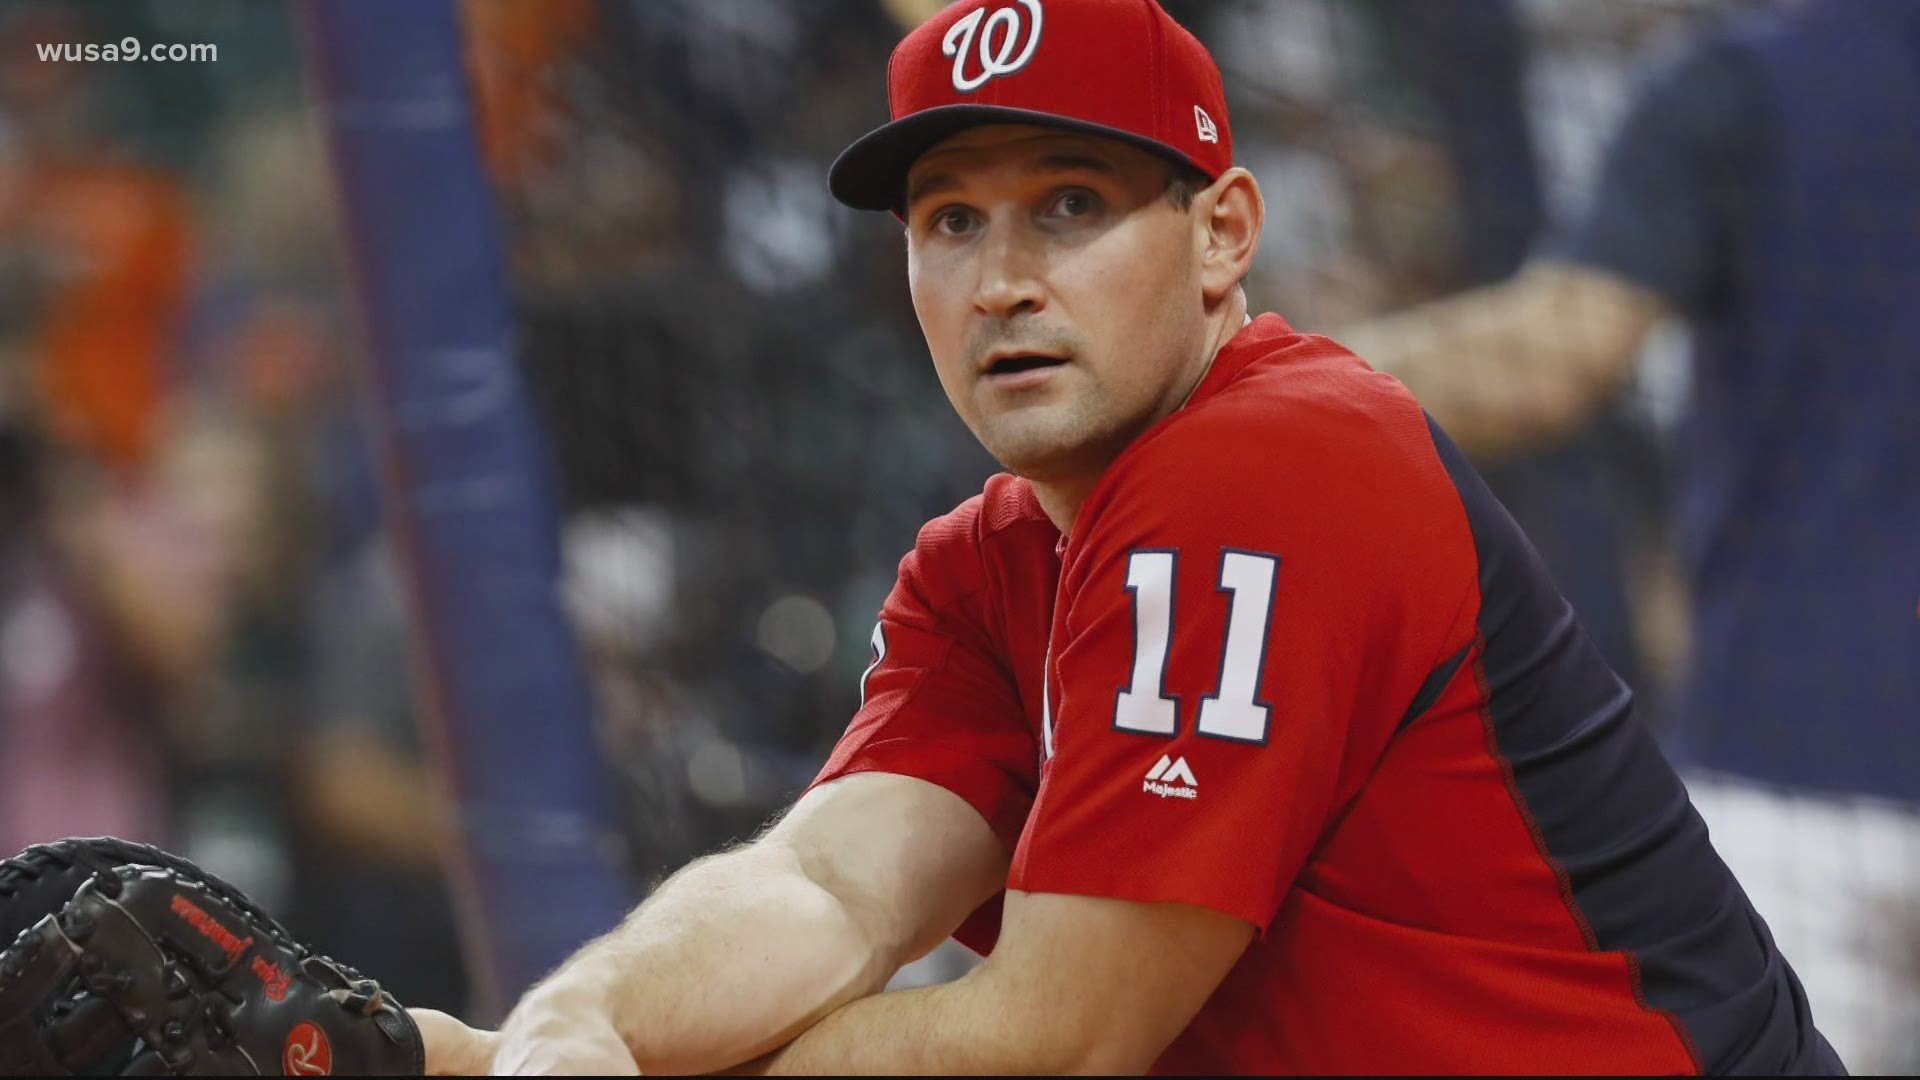 Ryan Zimmerman to have more limited role at first base, but not ready to retire